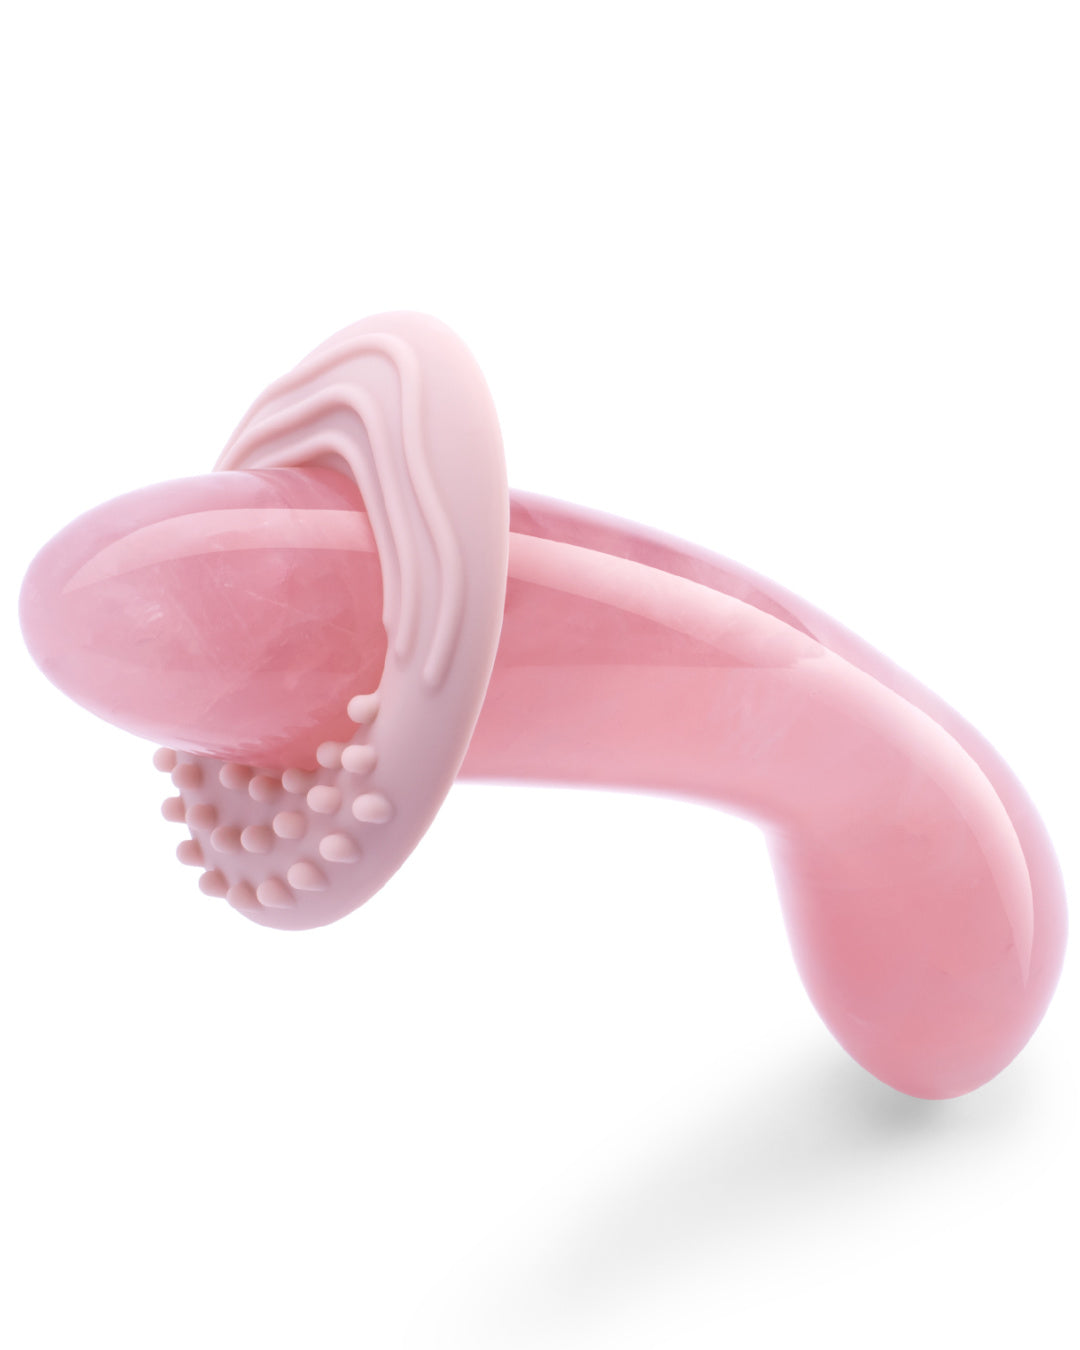 Le Wand Crystal G Spot Wand - Rose Quartz on an angle with silicone ring on it 